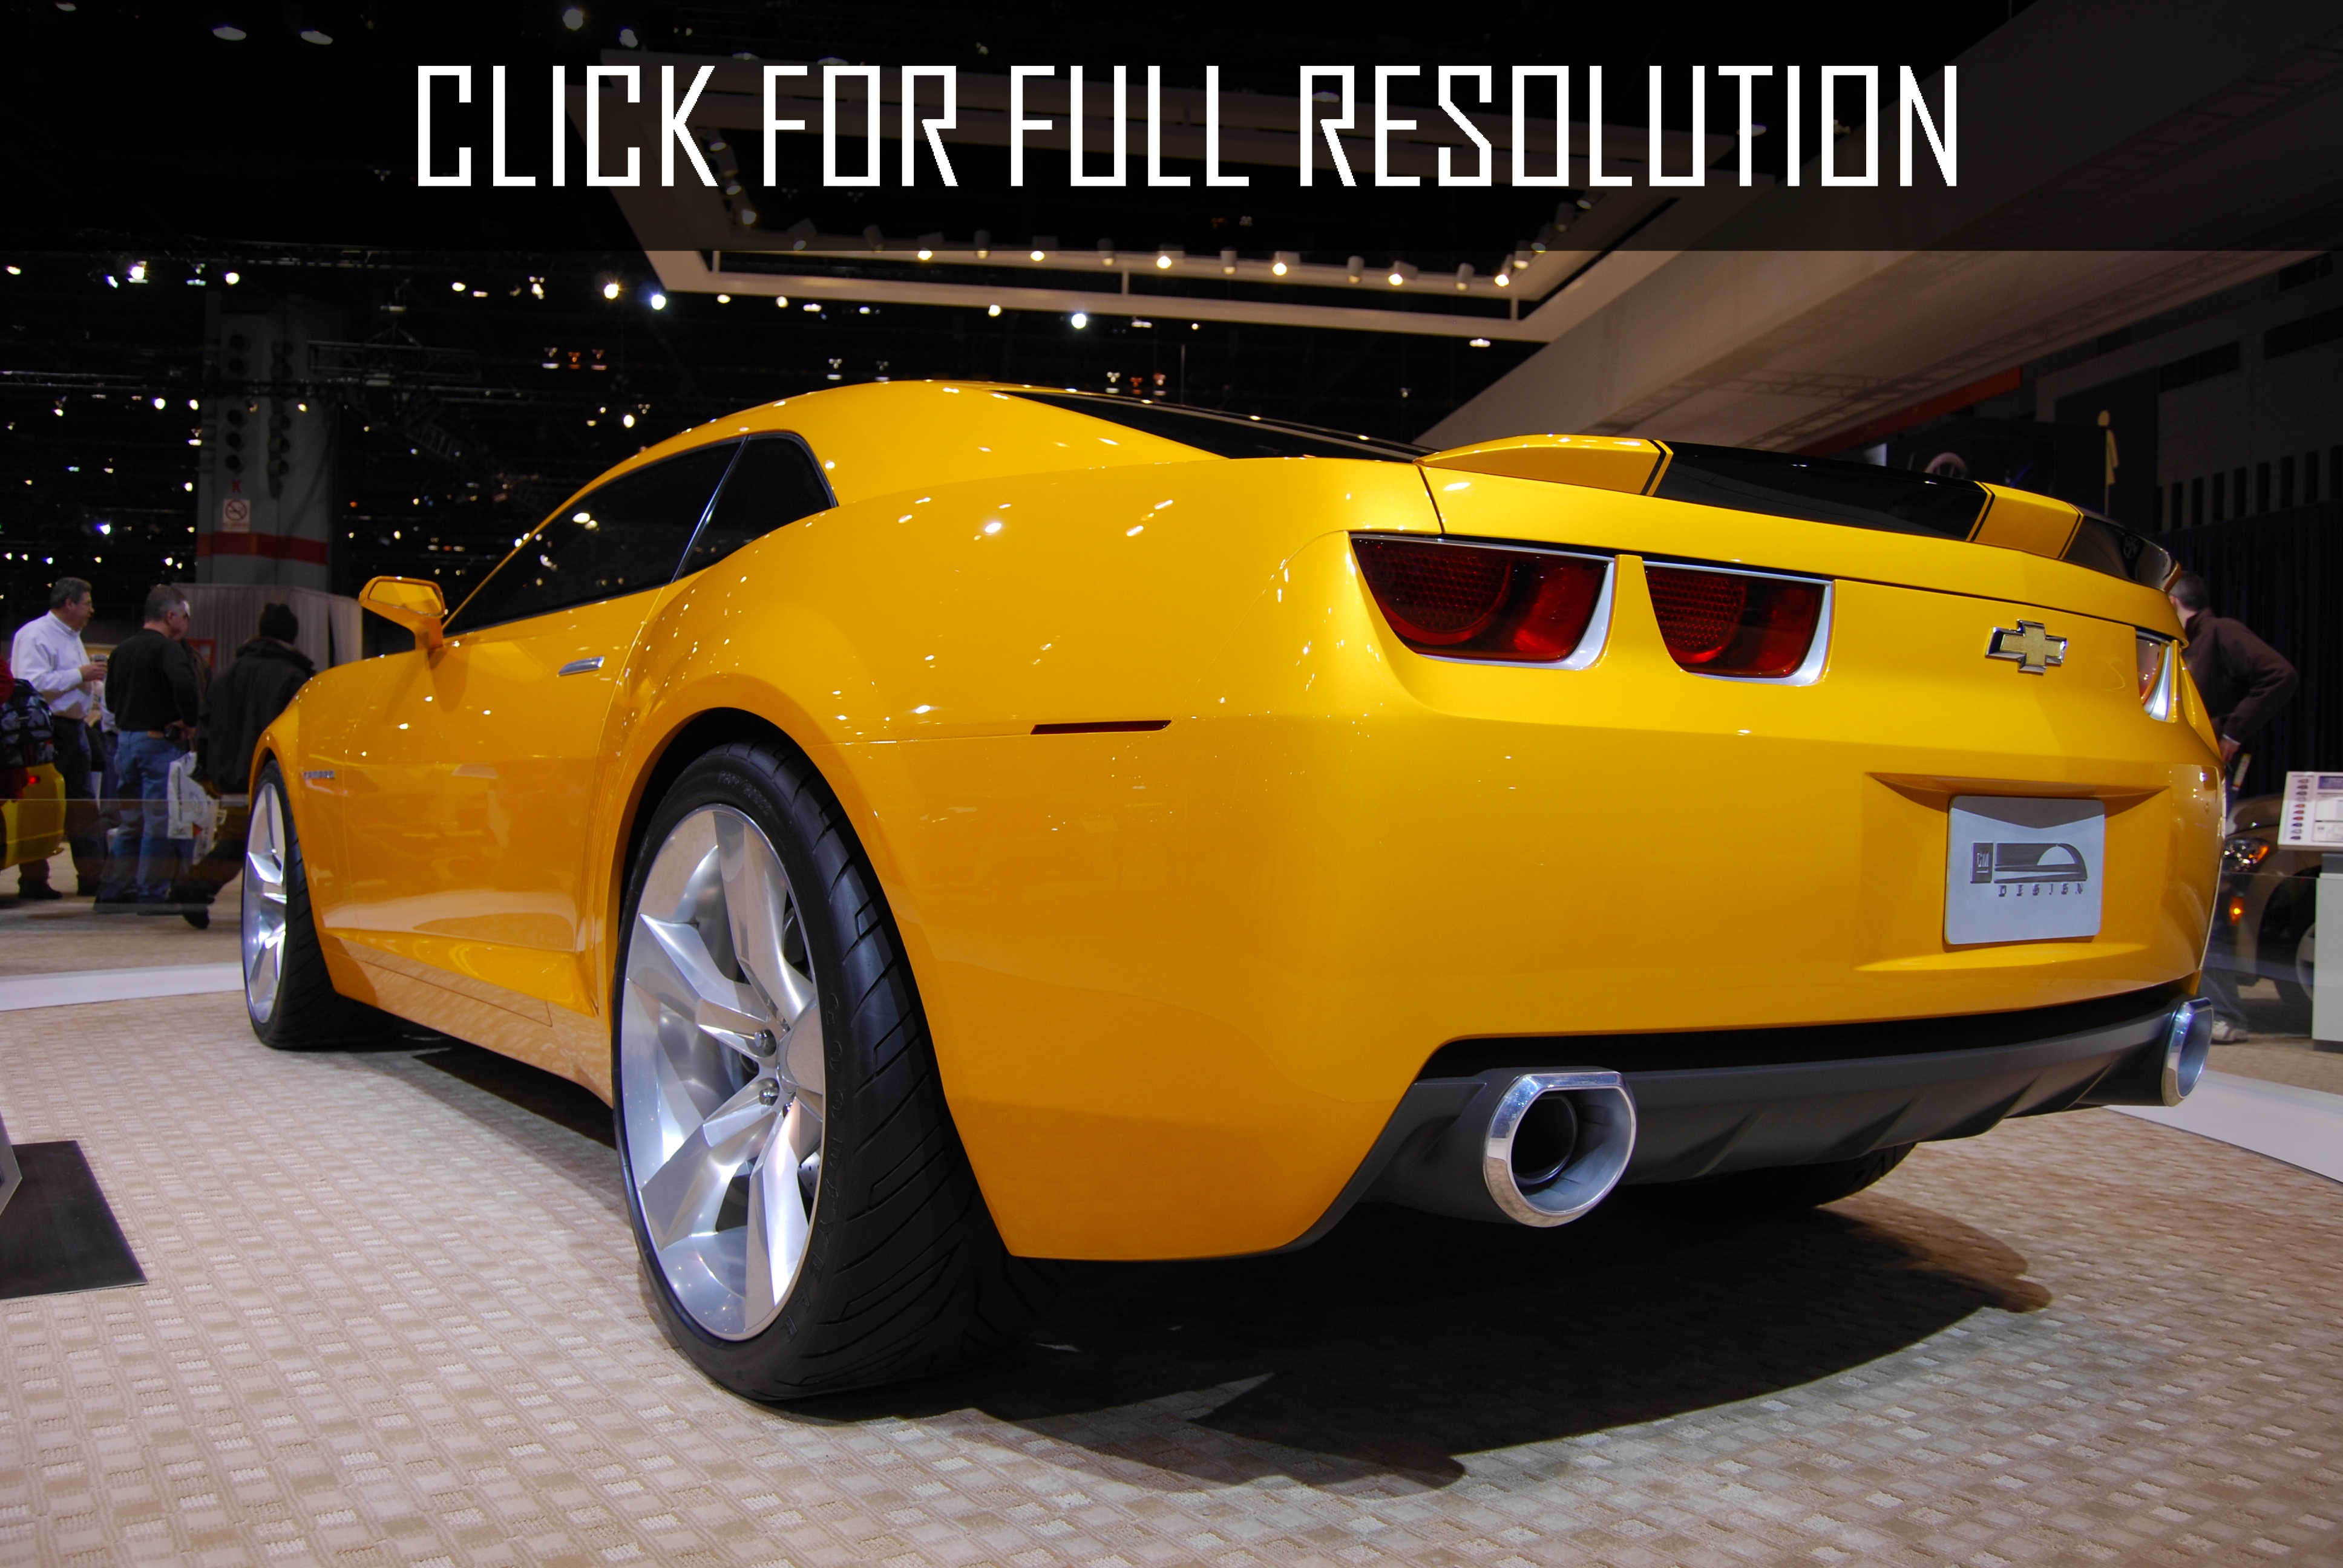 2008 Chevrolet Camaro news, reviews, msrp, ratings with